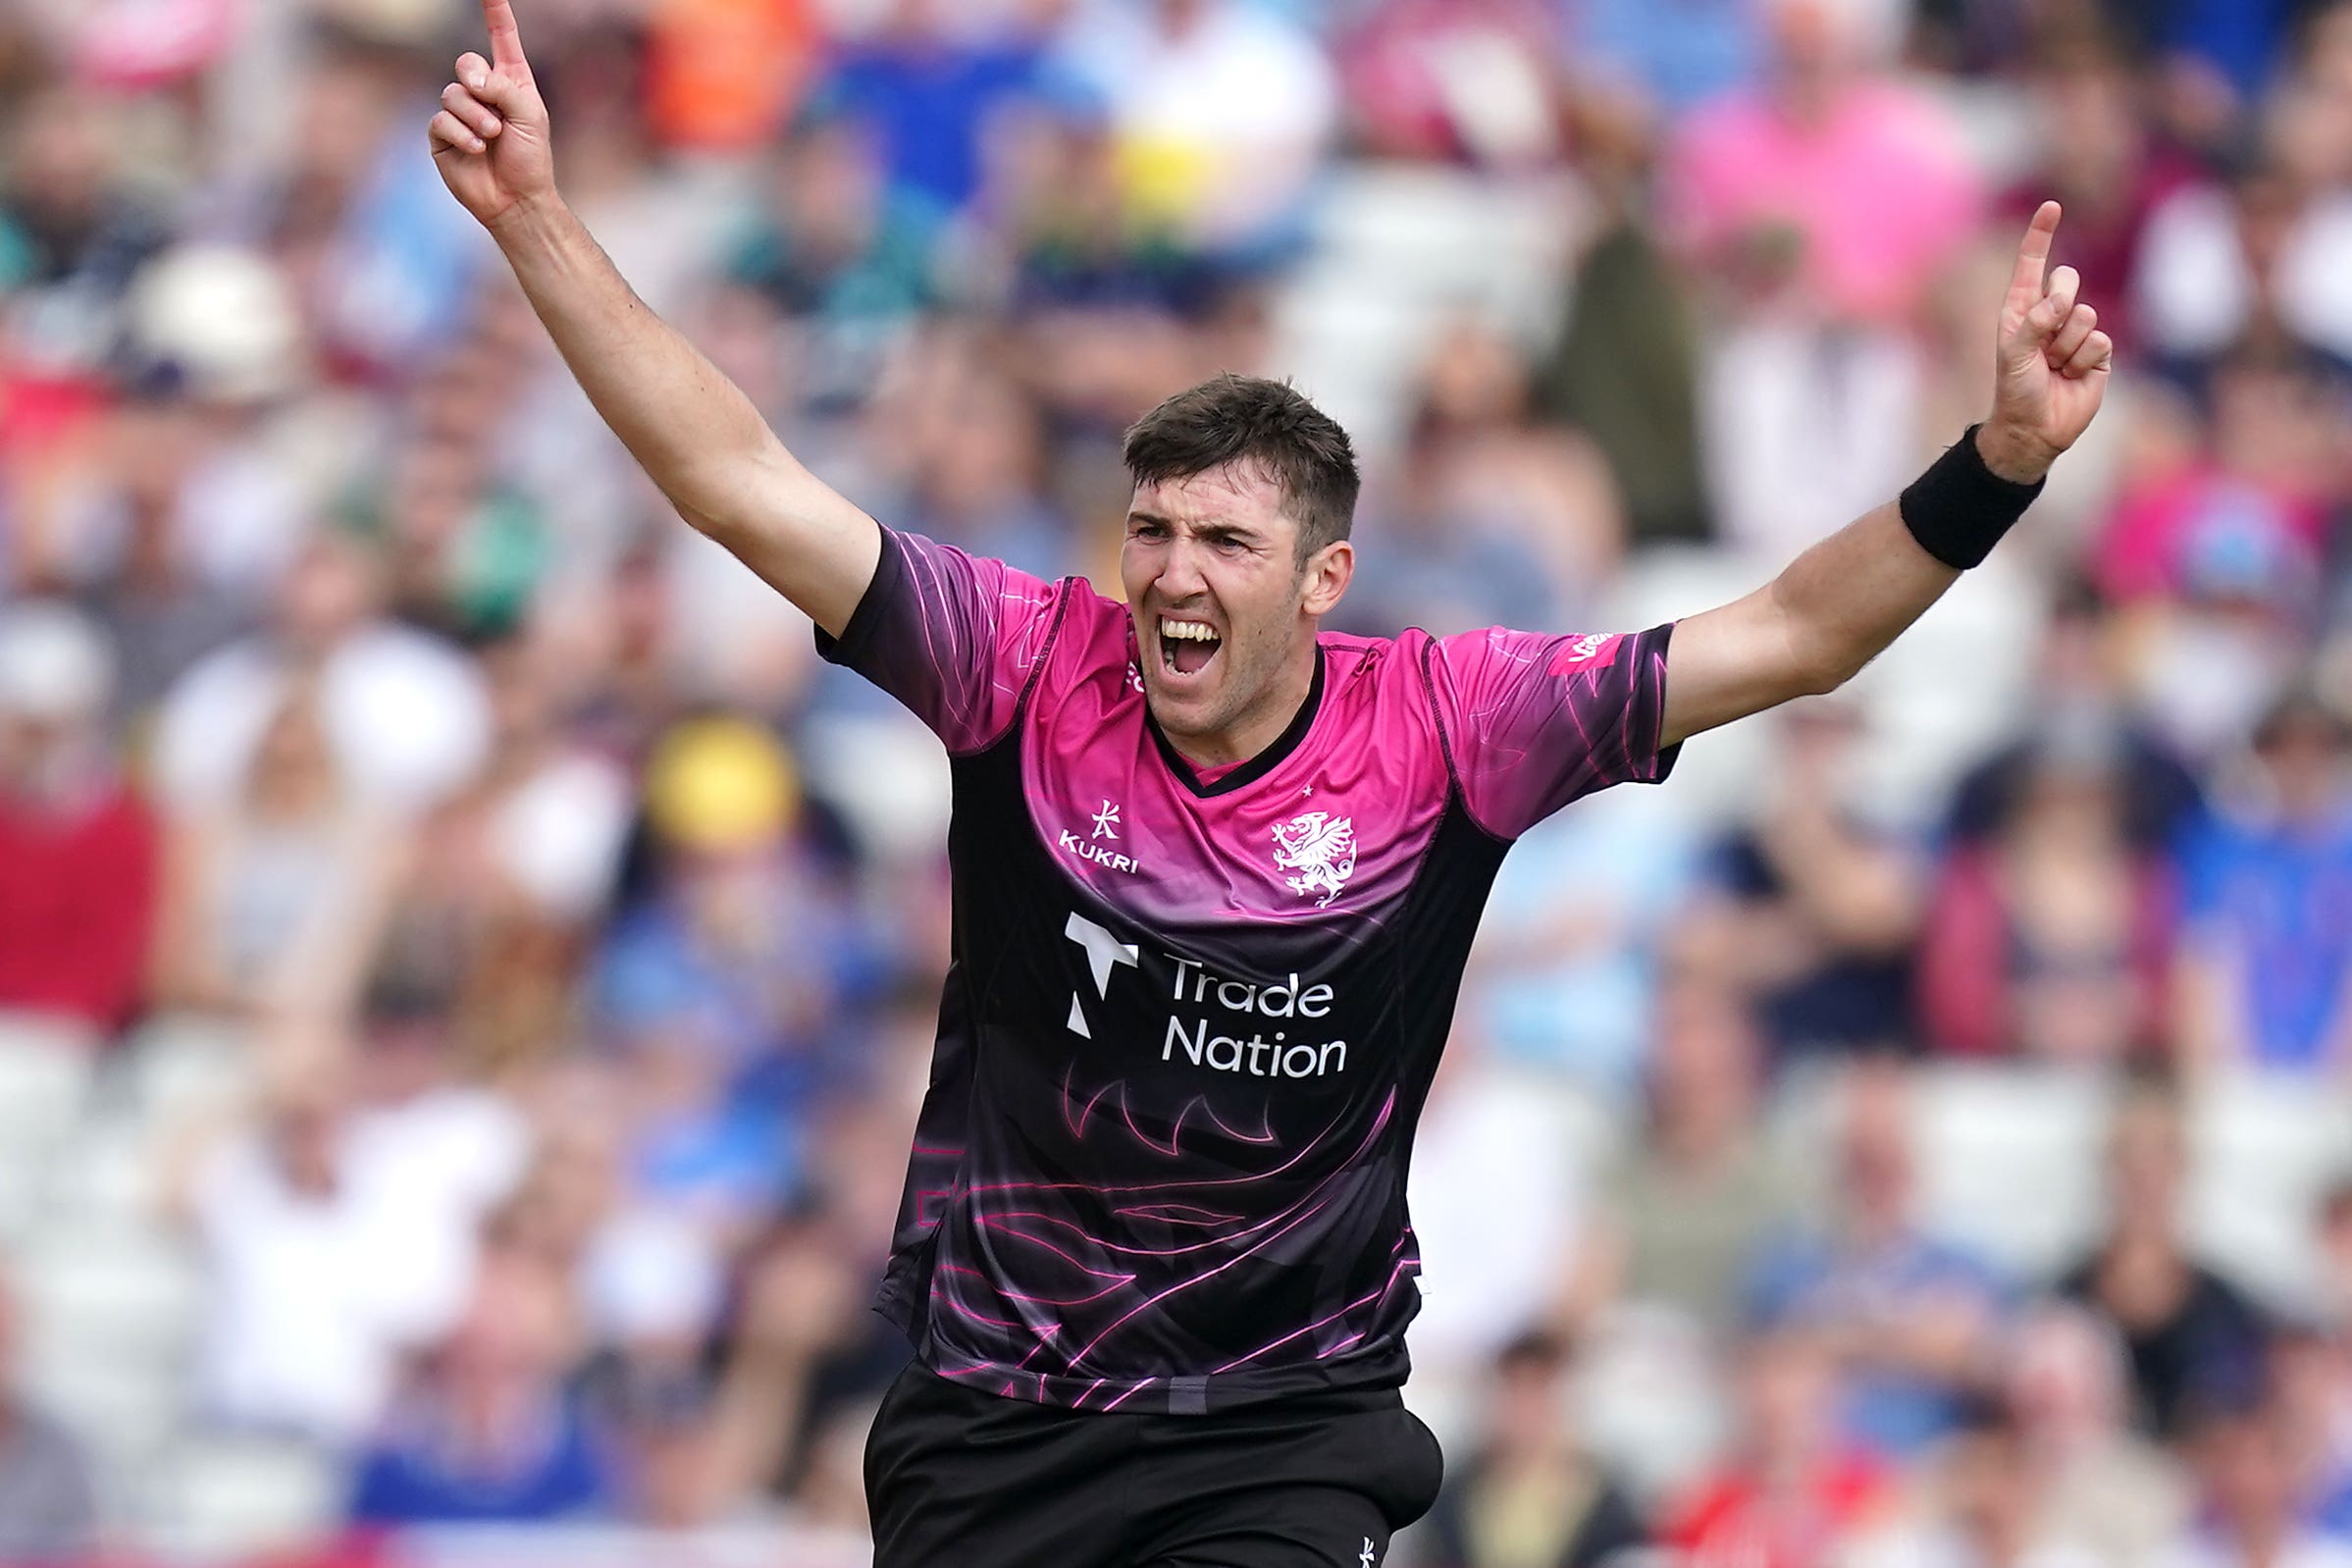 Craig Overton celebrates taking a wicket for Somerset (Mike Egerton/PA)